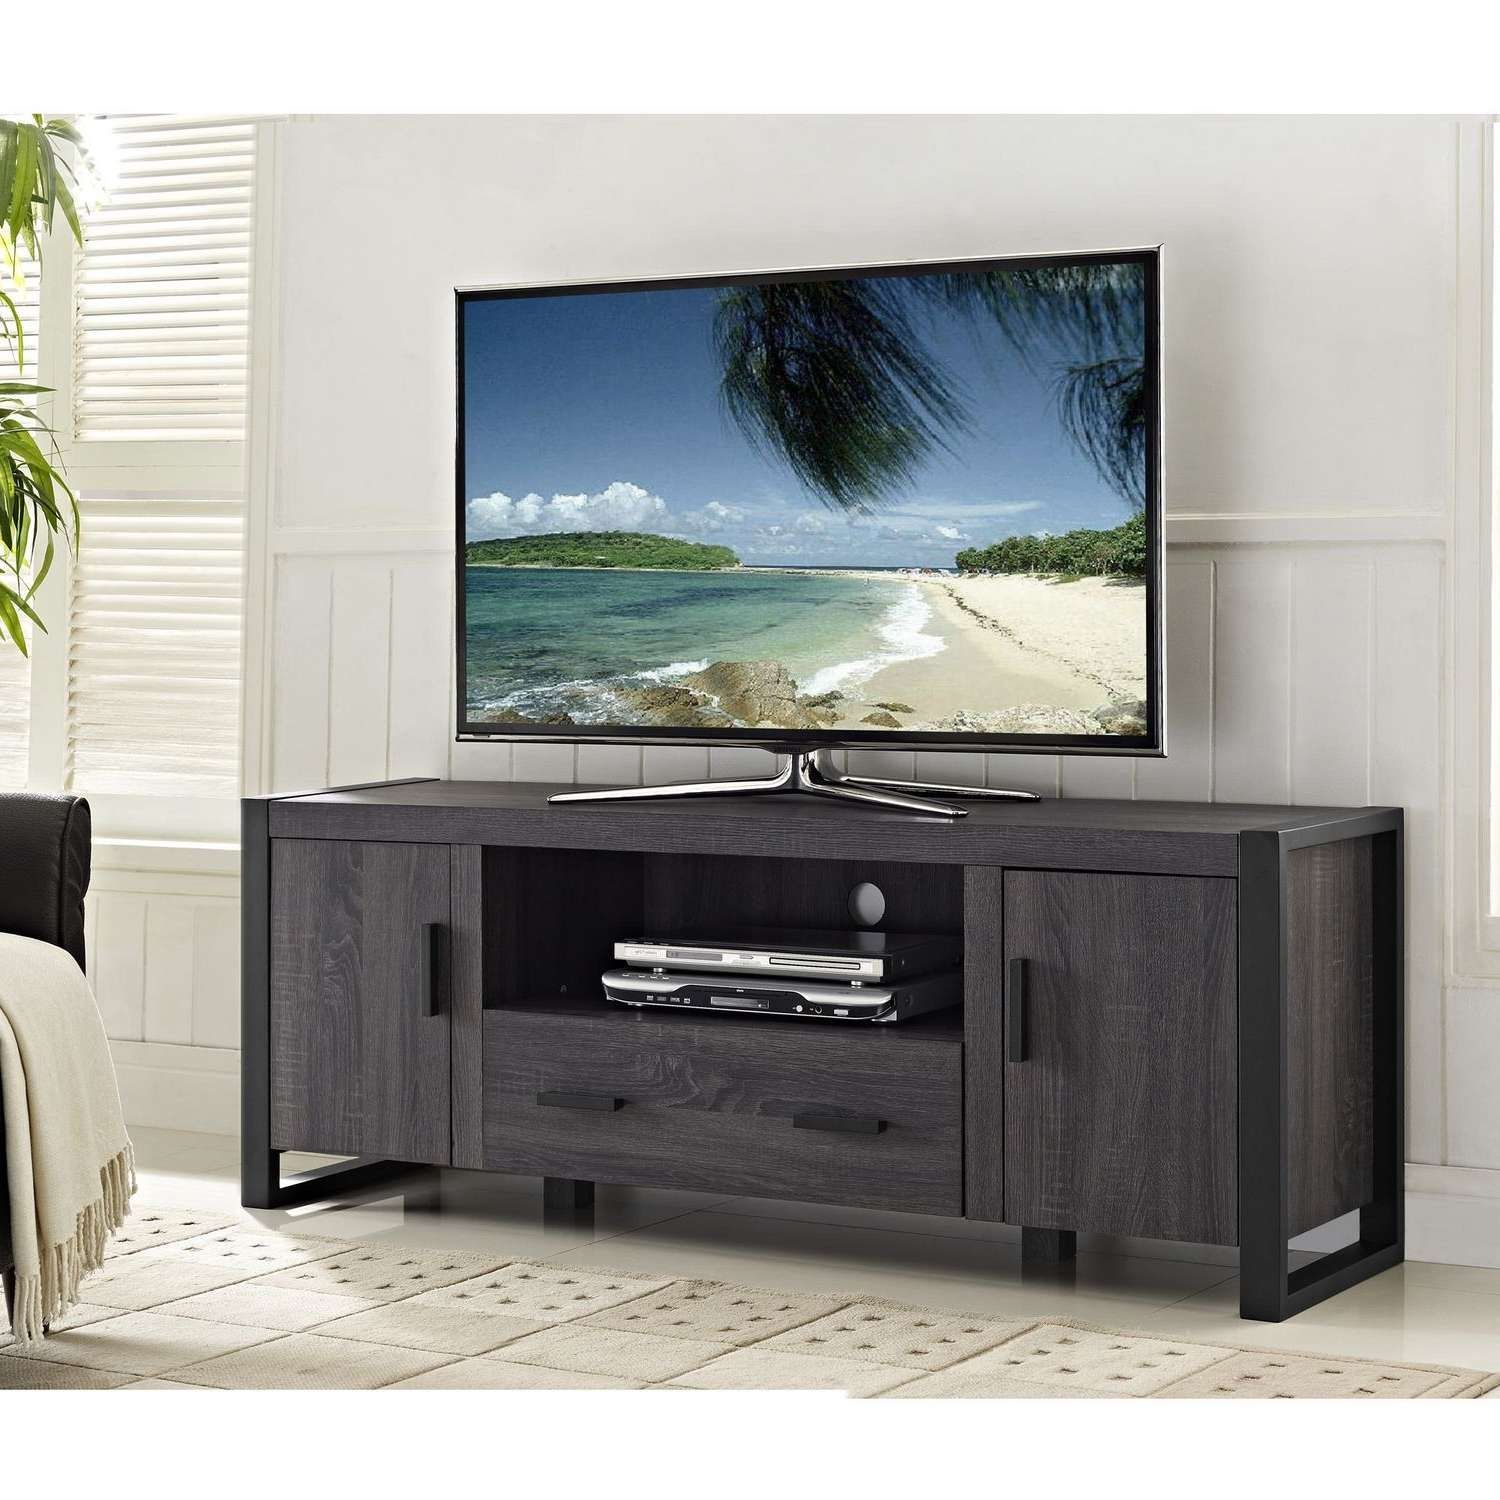 We Furniture 60" Grey Wood Tv Stand Console | Walmart Canada In Grey Tv Stands (Gallery 5 of 15)